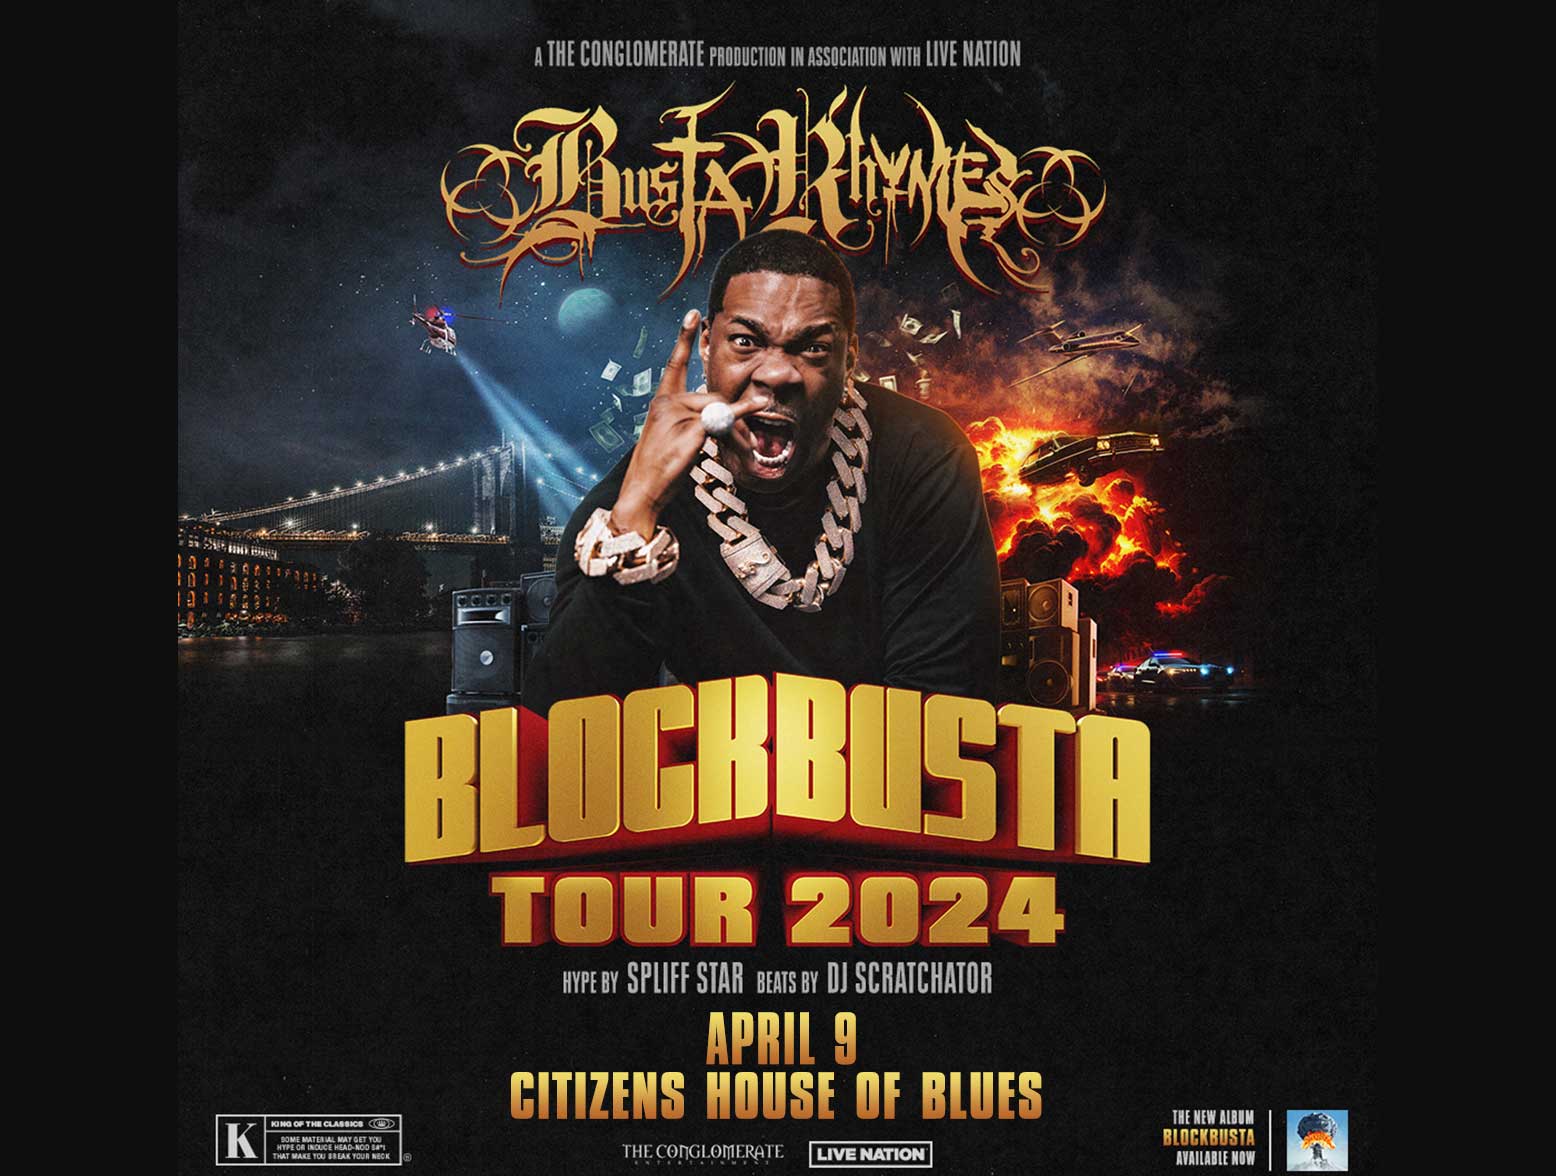 Busta Rhymes Blockbusta Tour 2-24 Artwork: Phhoto of him screaming with city sky line & explosions behind him,